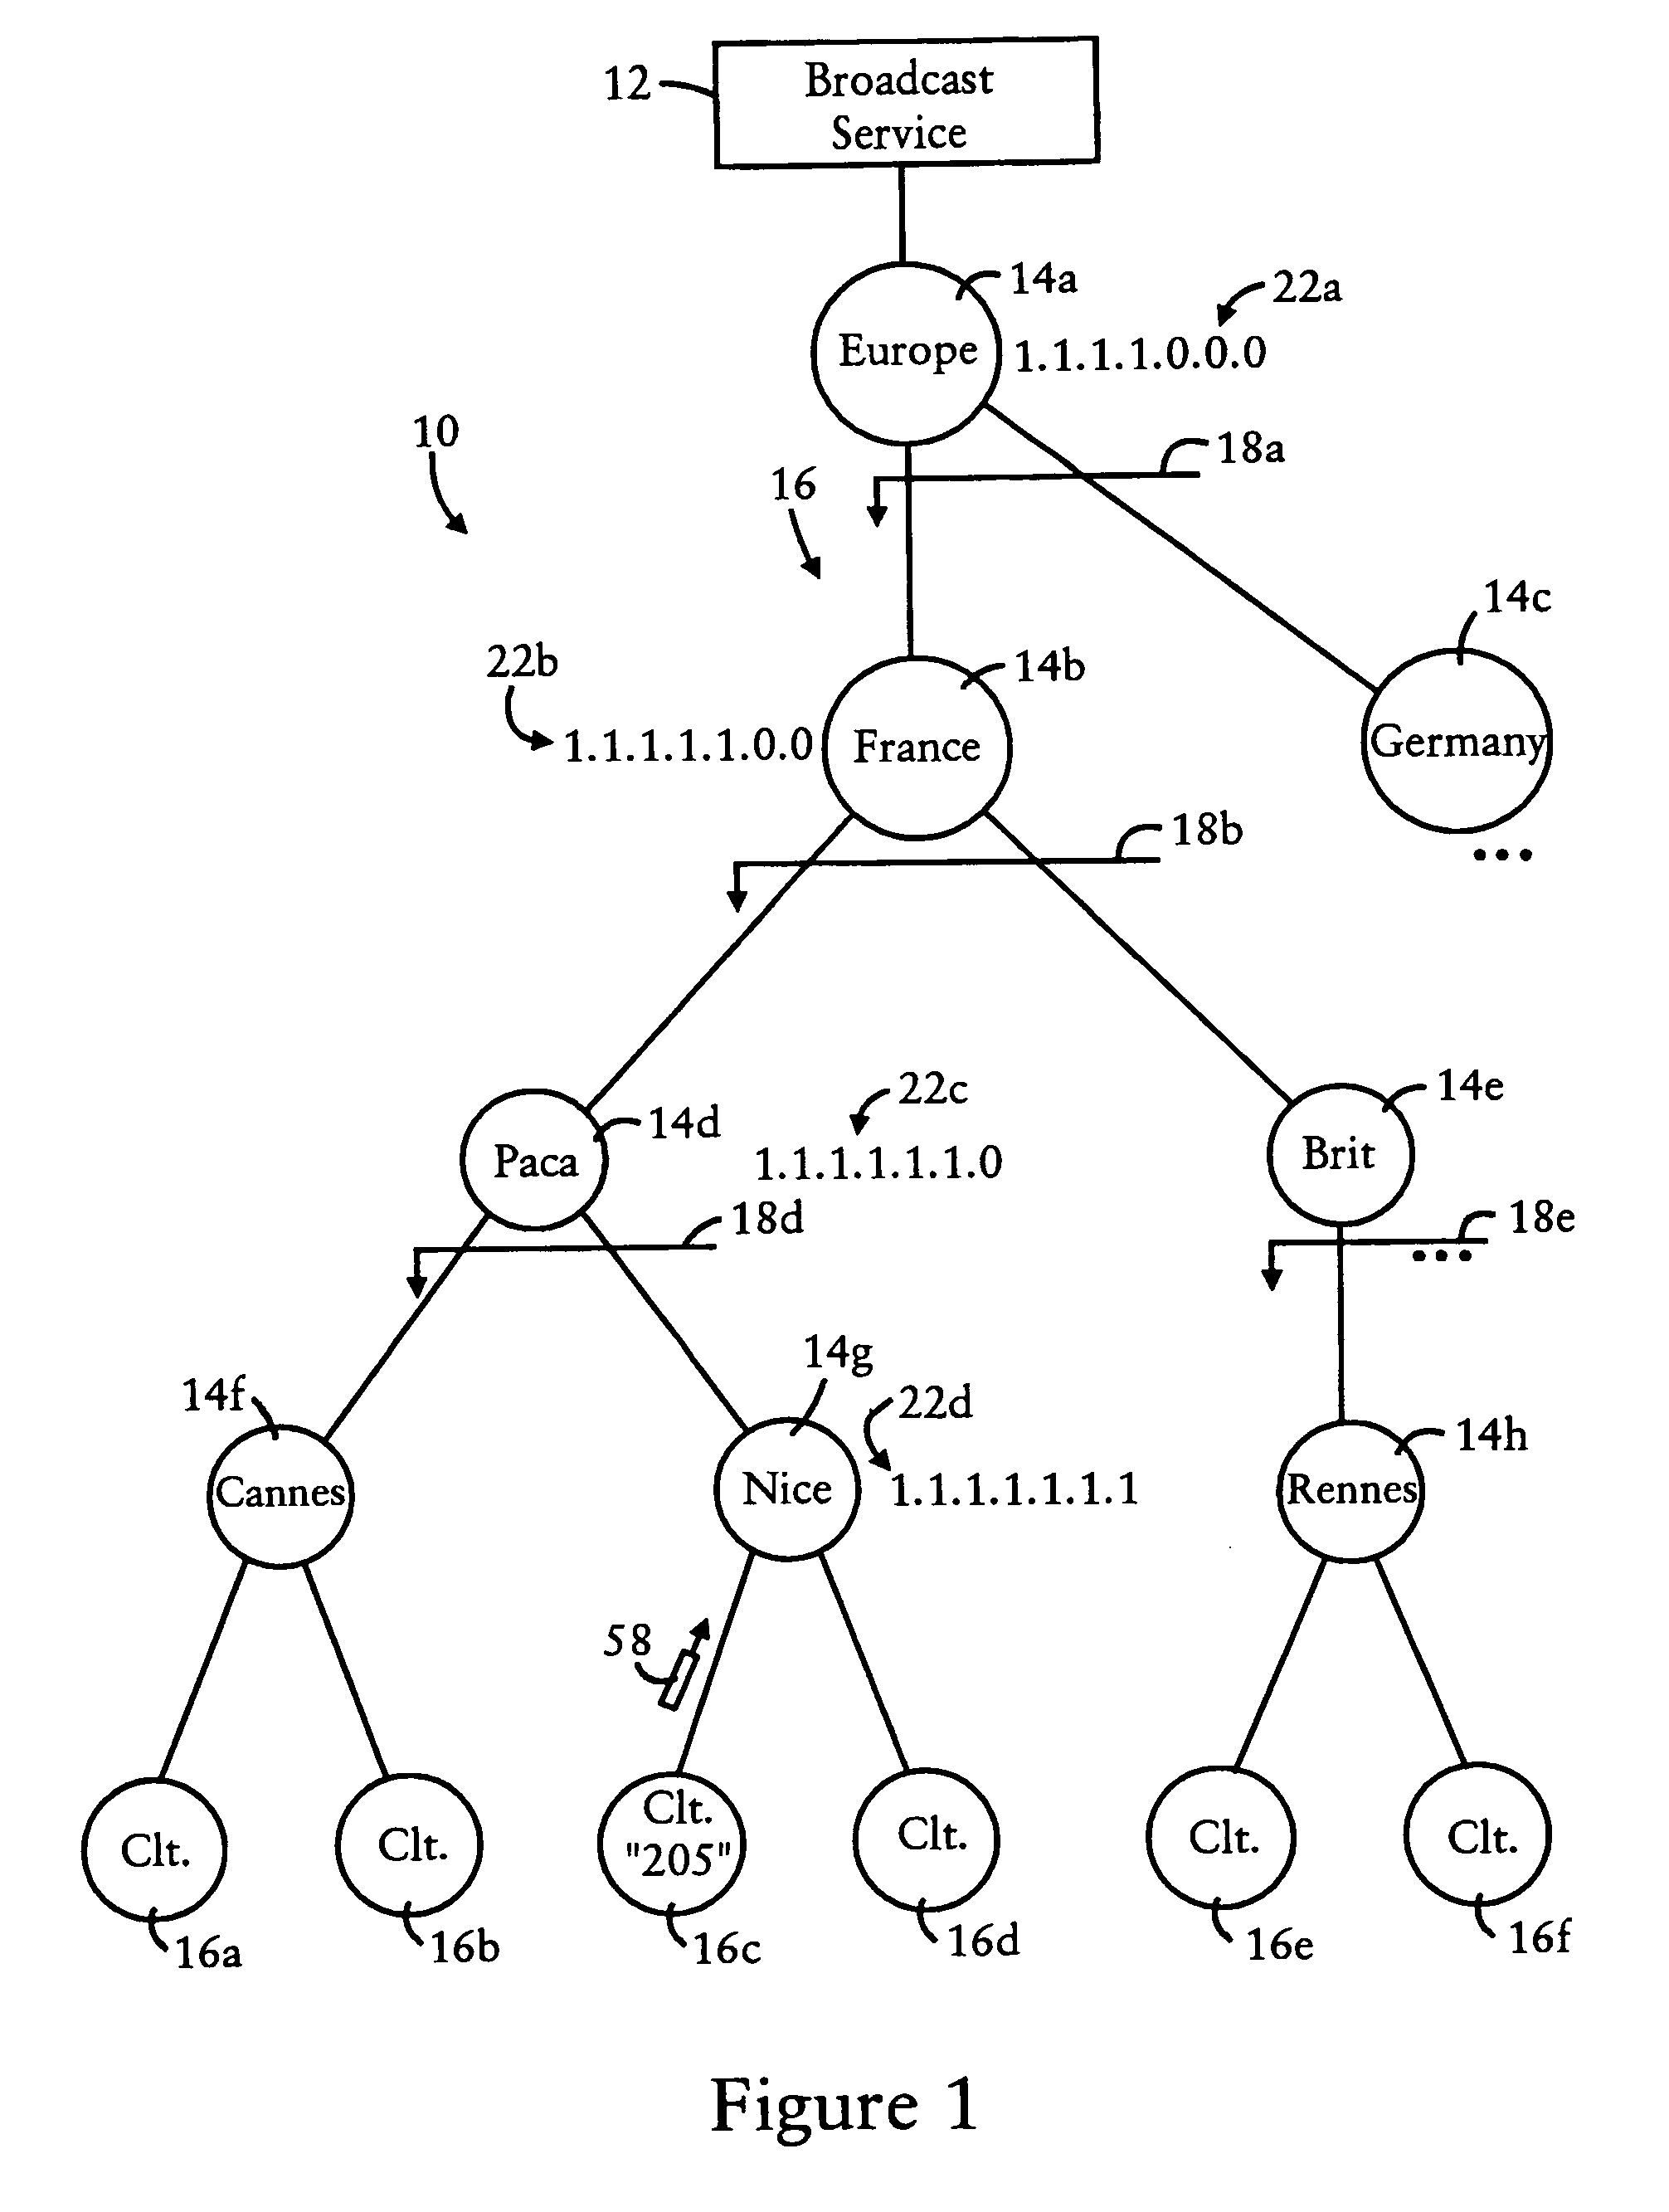 Arrangement in a router for establishing multicast group hierarchy and coalescence